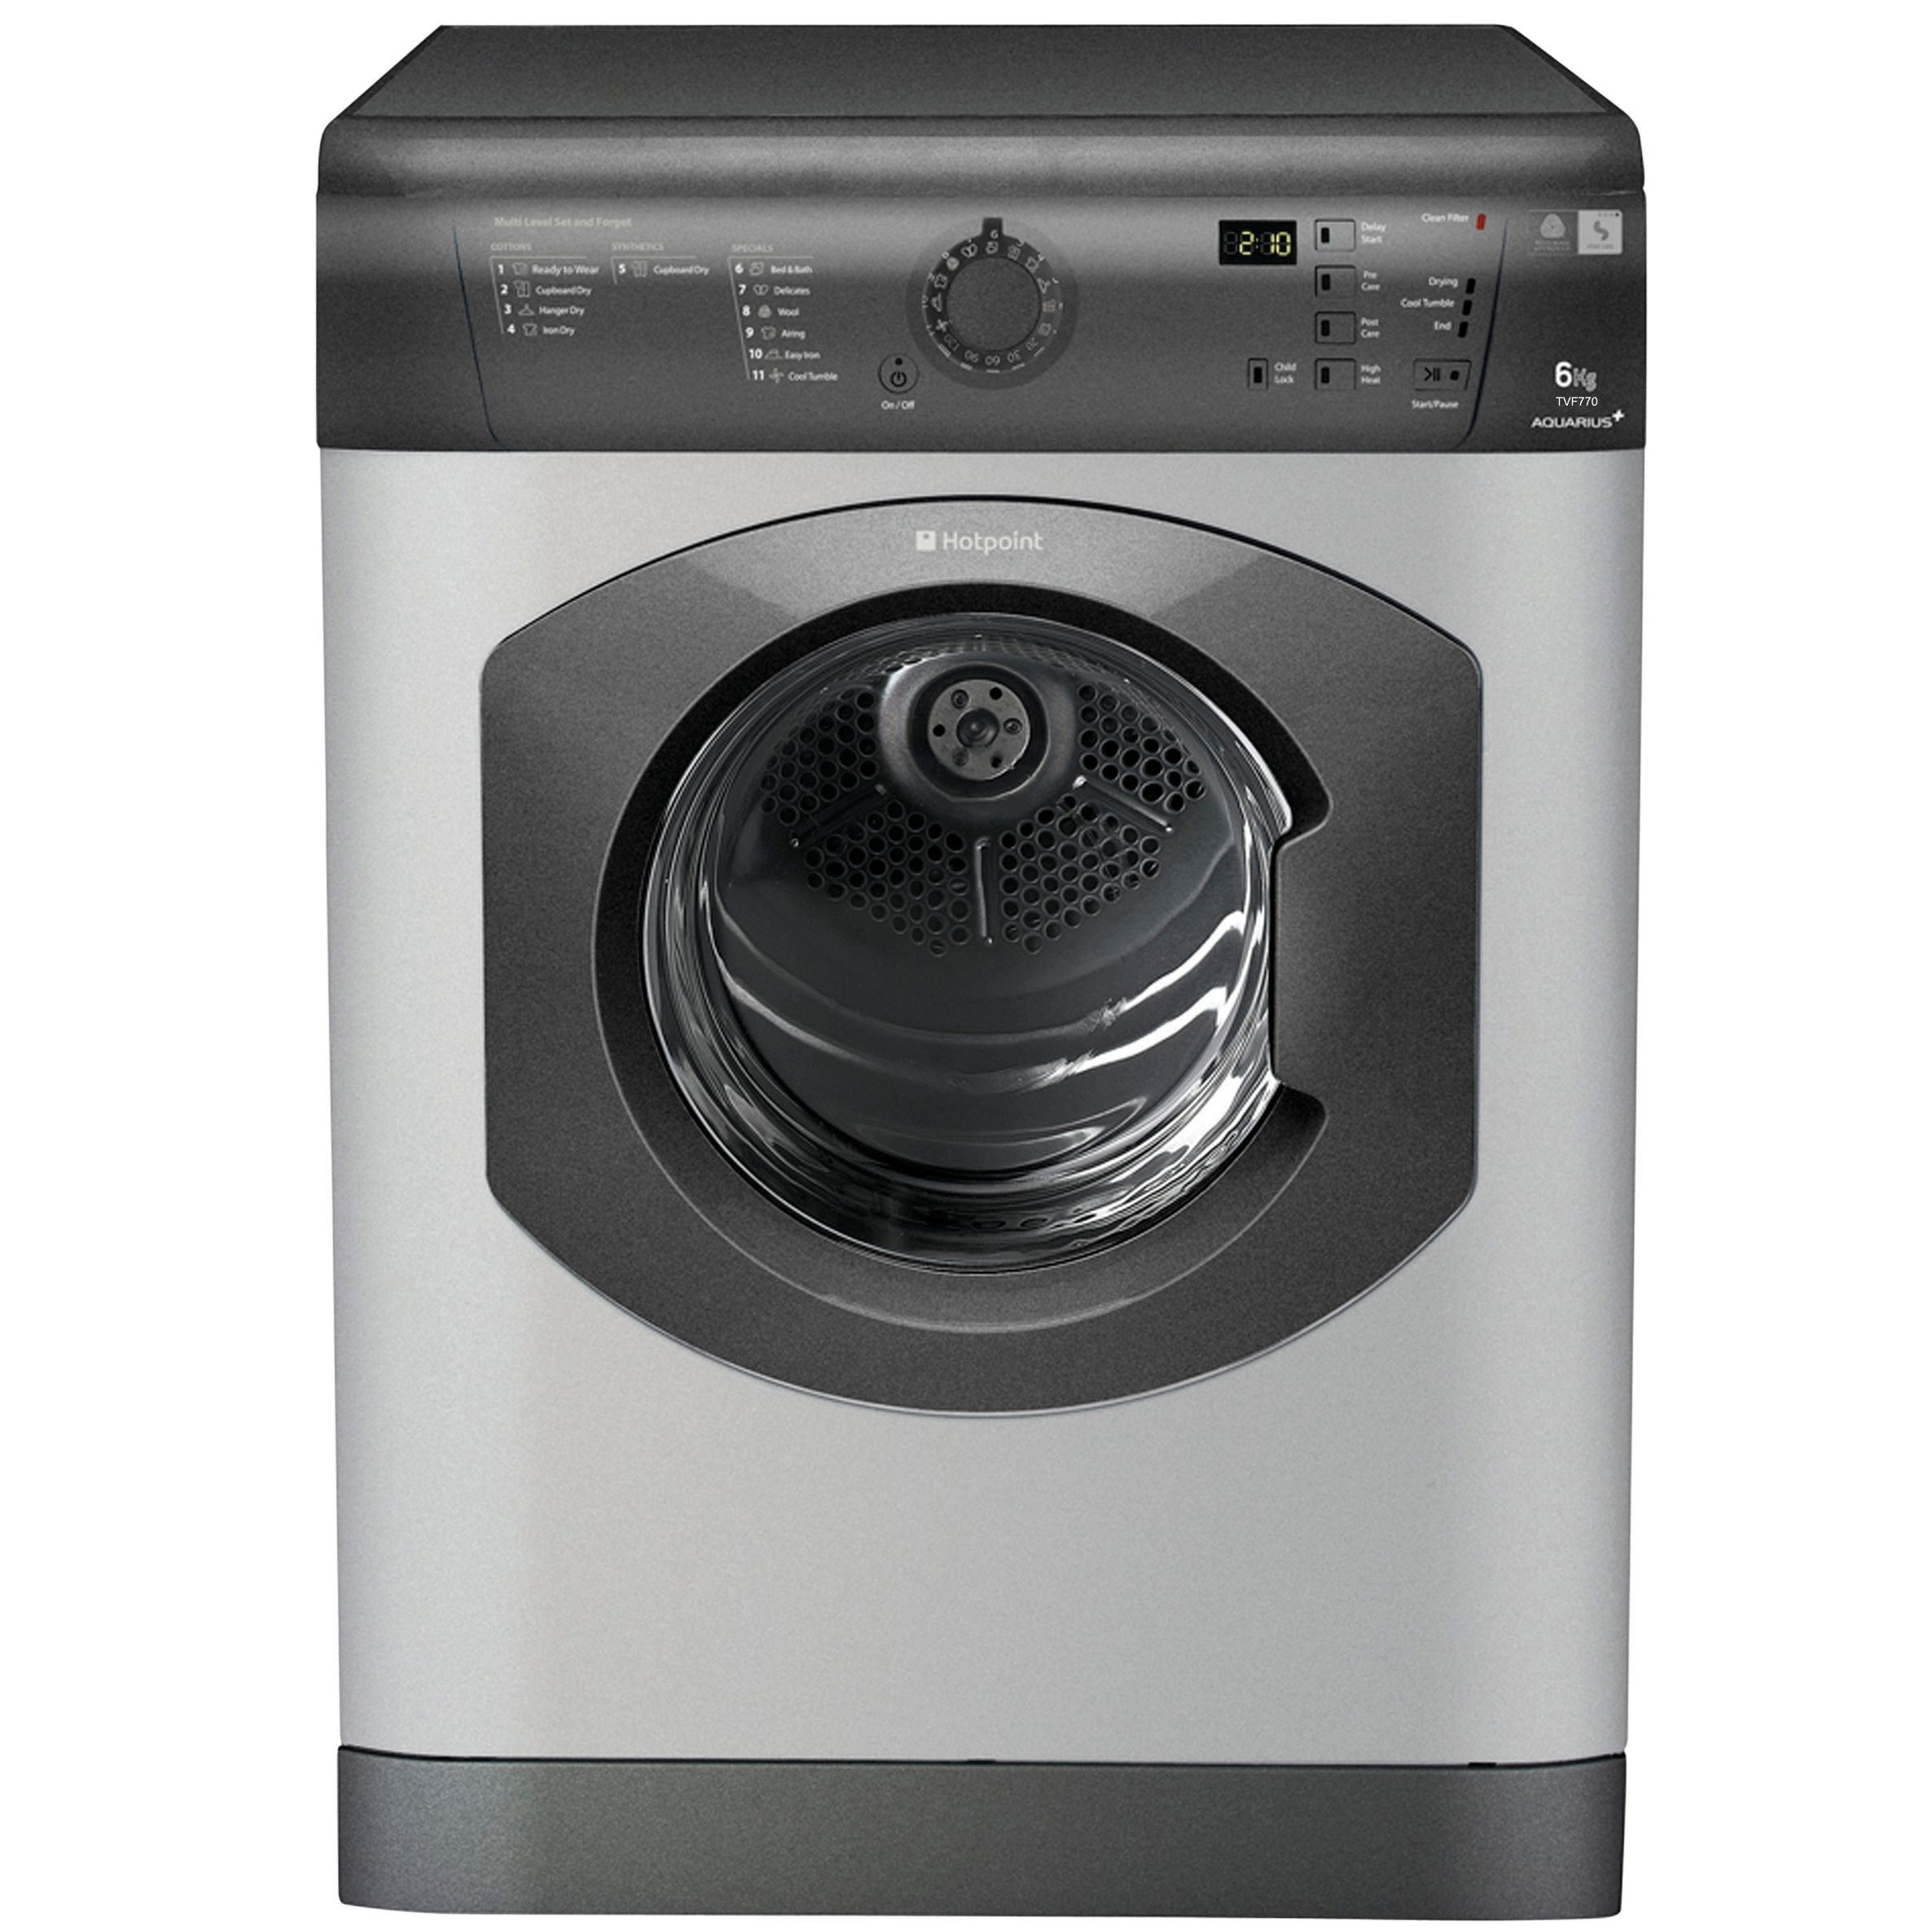 Hotpoint TVF770G Vented Tumble Dryer, Graphite at JohnLewis